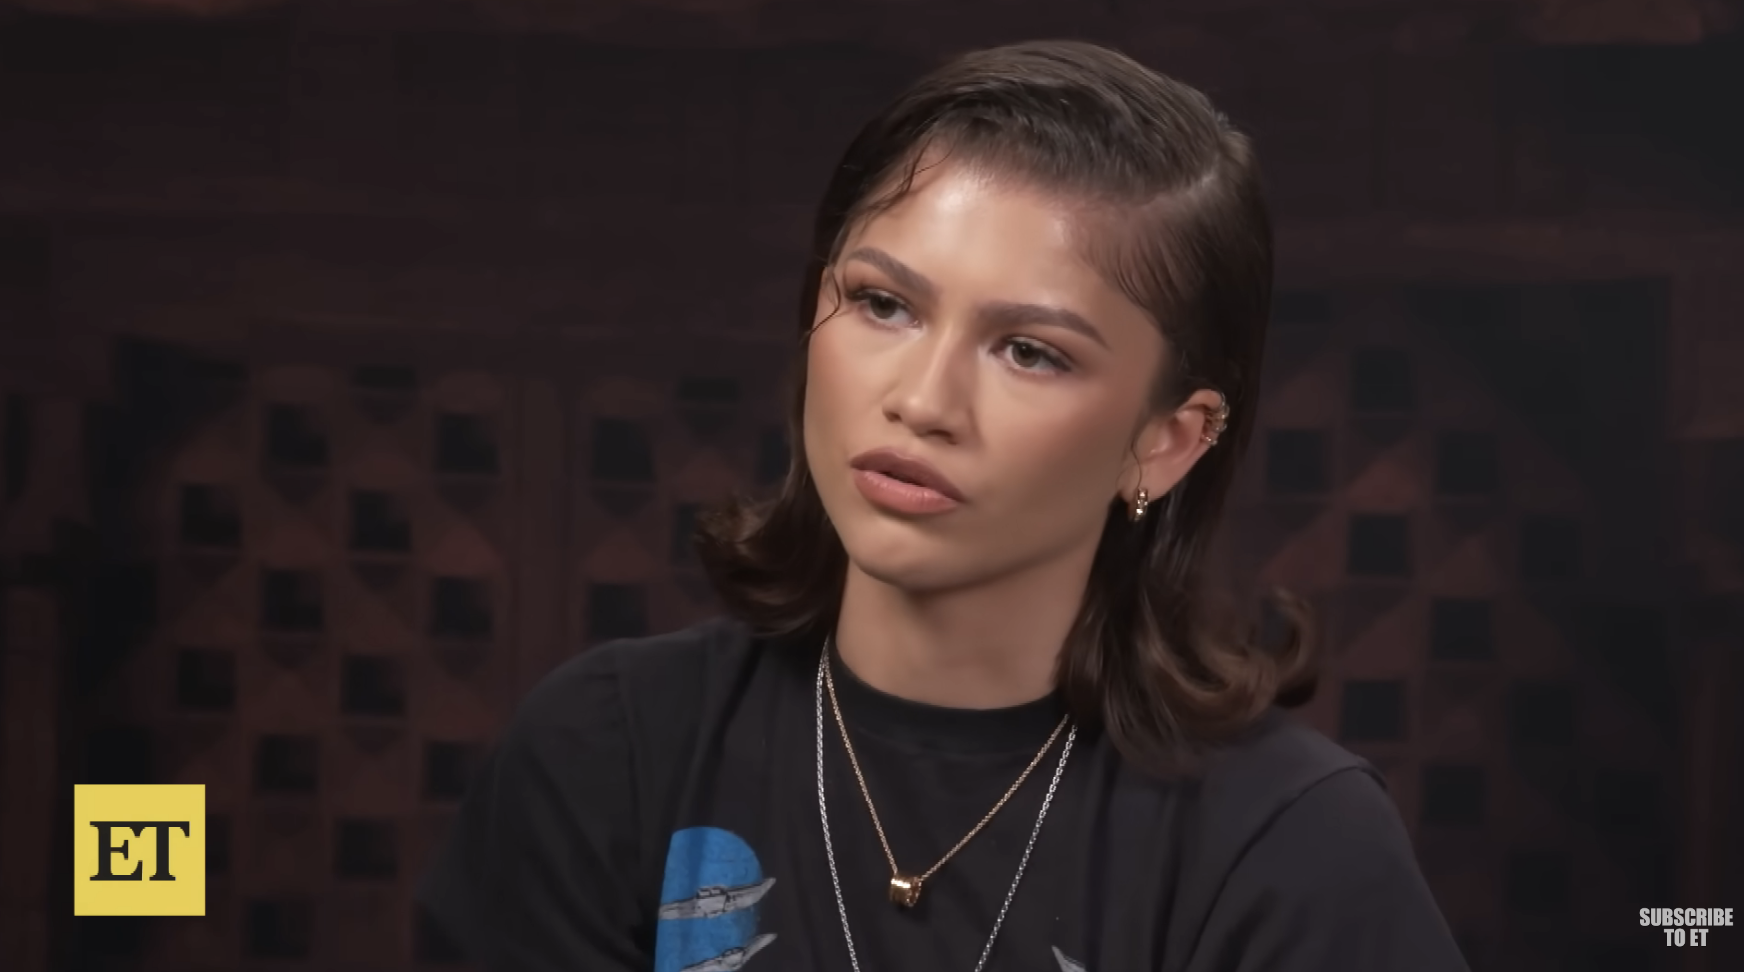 Zendaya in a top, with layered necklaces, during an interview